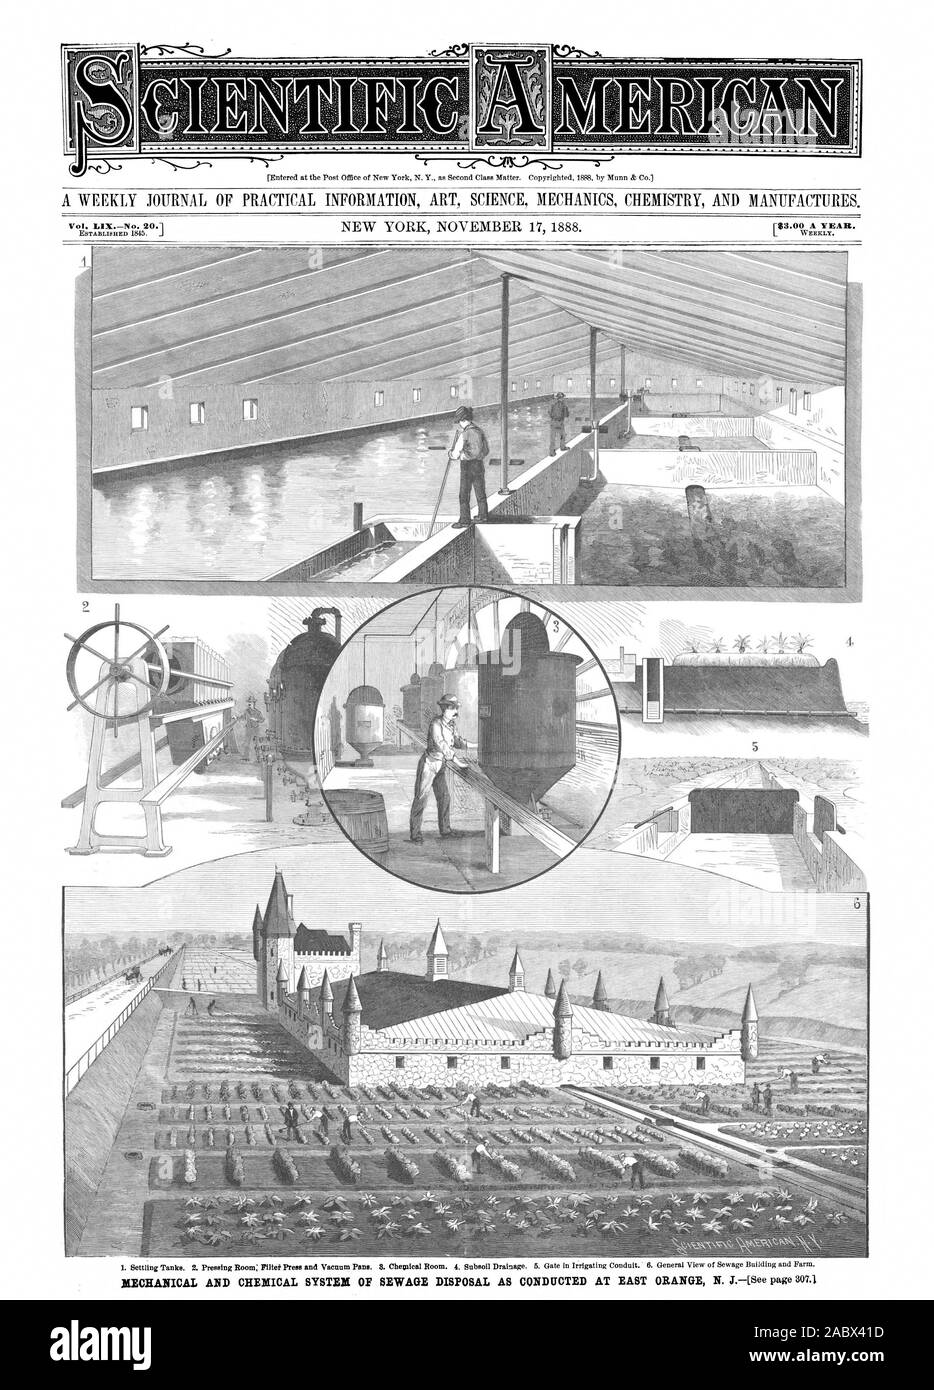 Entered at the Post Office of New York N. Y. as Second Class Matter. Copyrighted 1888 by Munn & Co. Vol. L1XNo. 20.1 WEEKLY., scientific american, 1888-11-17 Stock Photo